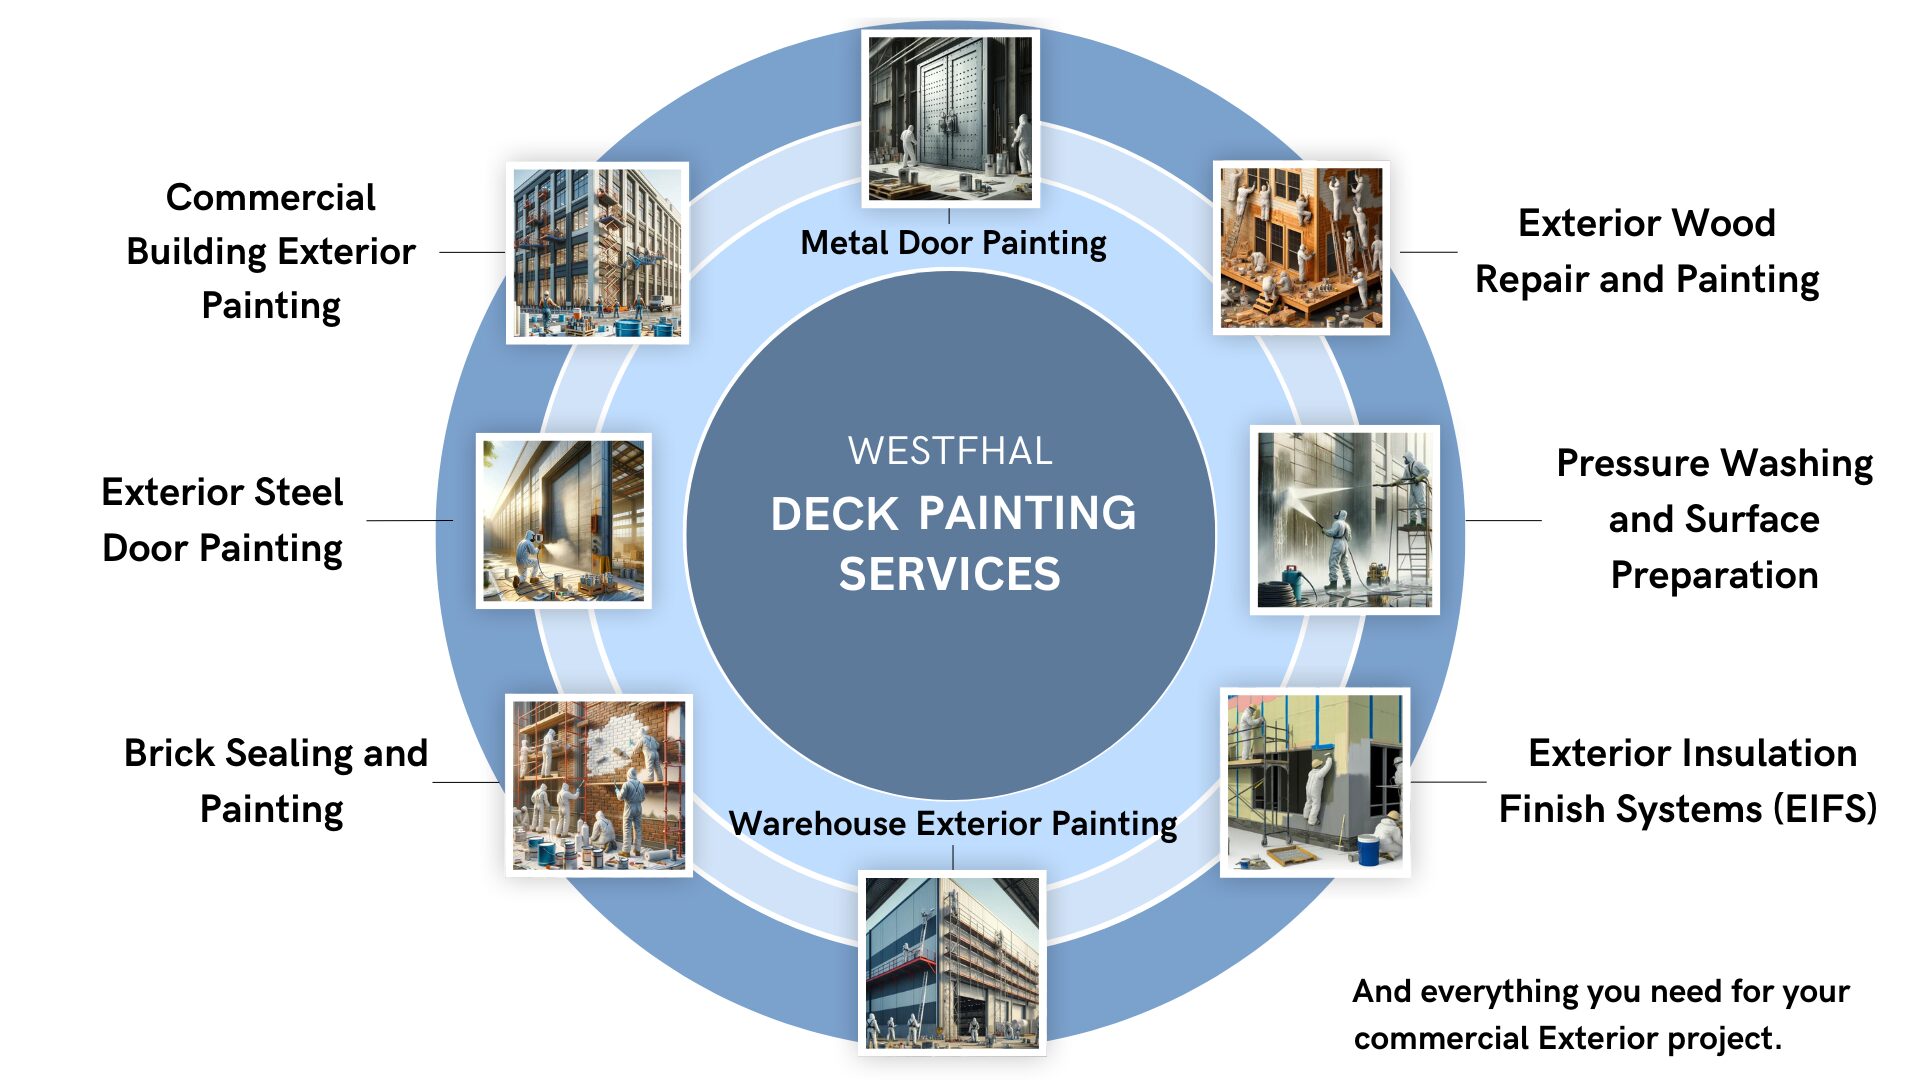 Infographic displaying the top commercial exterior painting services offered by Westfhal Painting.